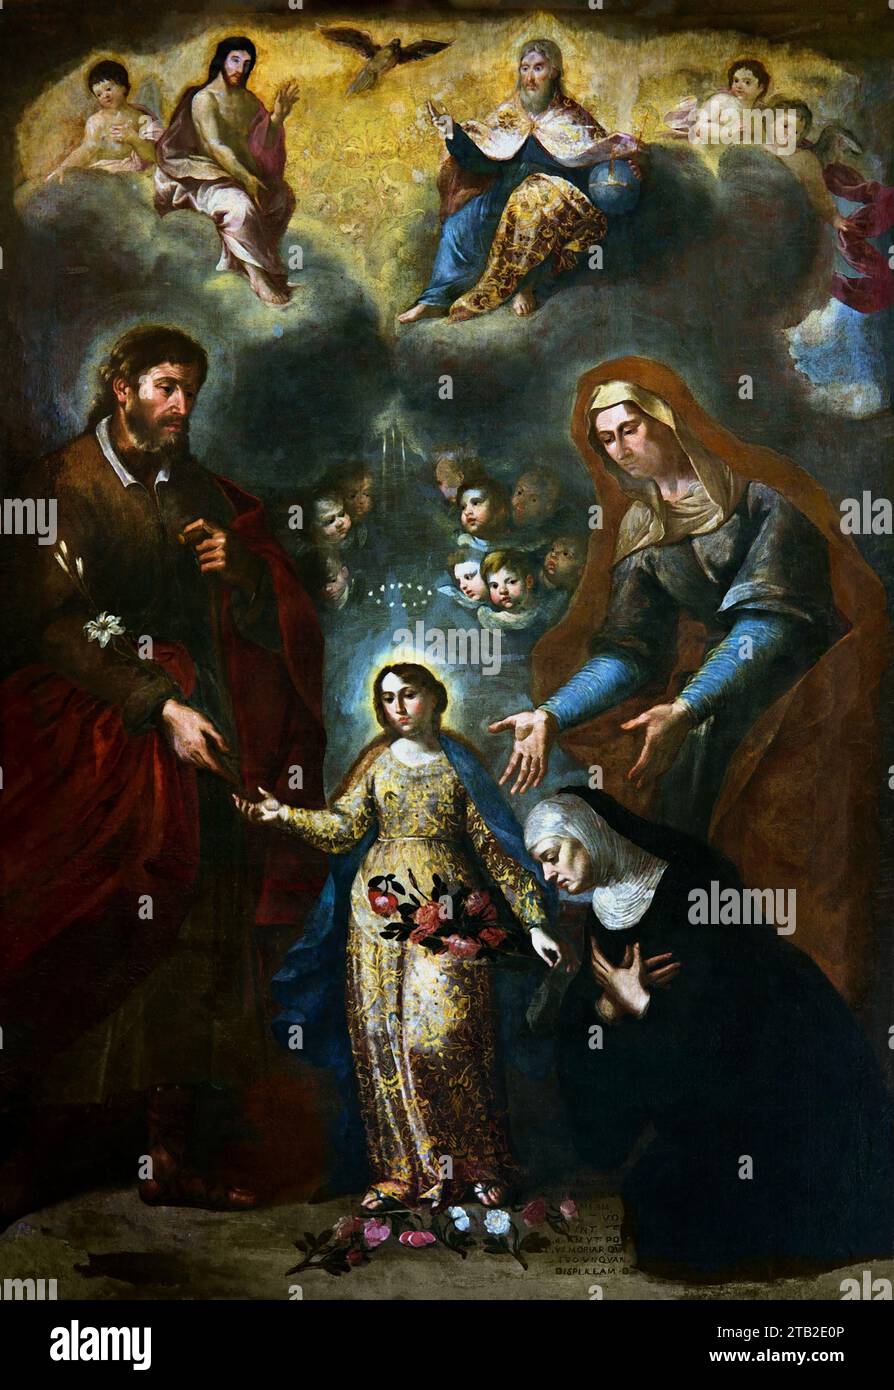 La Trinità, San Gioacchino, Sant Anna e la Vergine Bambina - The Trinity, Saint Joachim, Saint Anna and the Virgin Child 1670 by Giacinto de Populi. Chiesa di San Giorgio - San Giorgio Church - St. George is the most beautiful Baroque church existing in Salerno, rich in frescoes of the highest quality.  It is one of the oldest monastic settlements of Salerno, which dates back to the early ninth century. Stock Photo